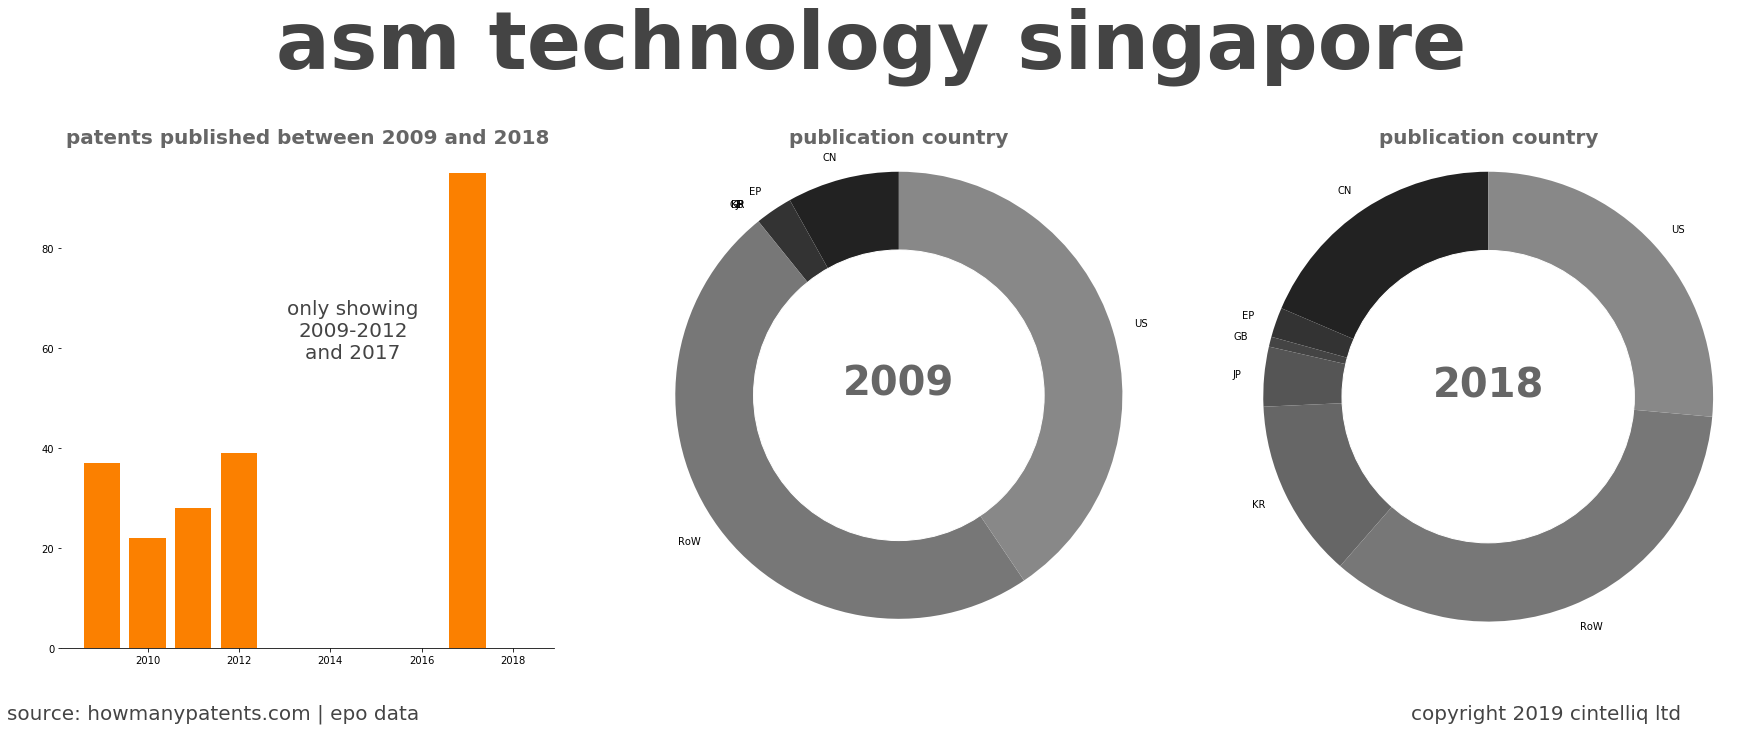 summary of patents for Asm Technology Singapore